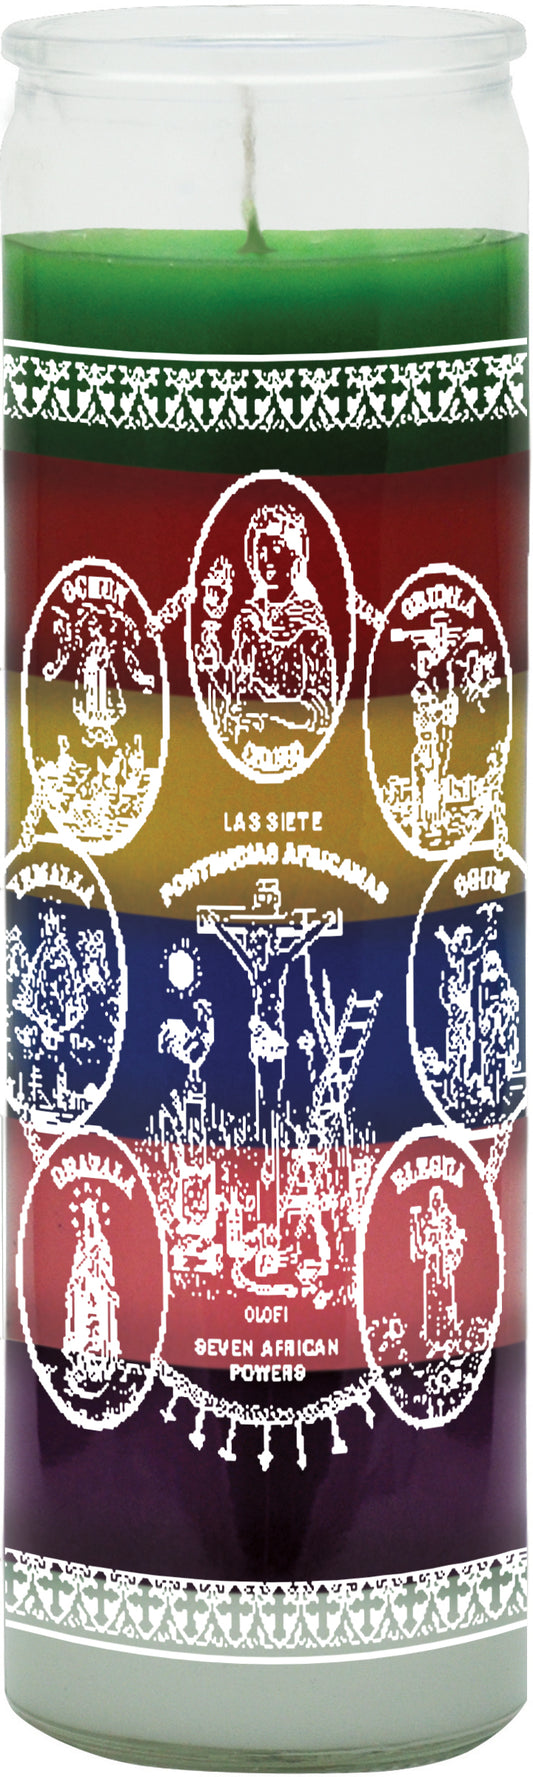 7 AFRICAN POWERS 7 COLOR-7 DAY SCREEN PRINTED CANDLE